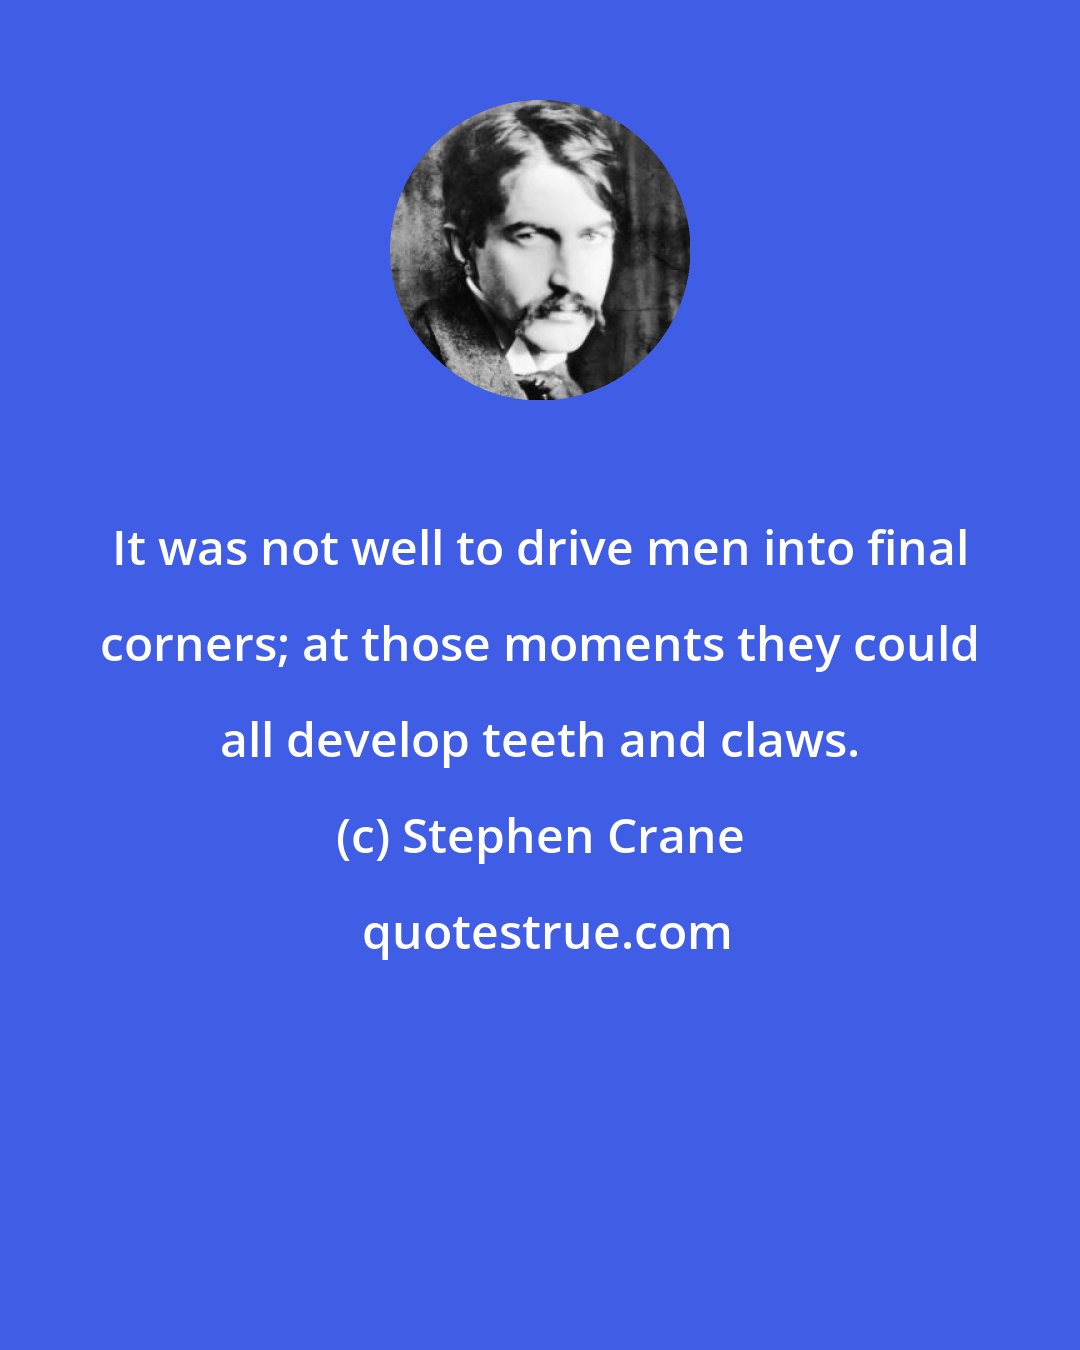 Stephen Crane: It was not well to drive men into final corners; at those moments they could all develop teeth and claws.